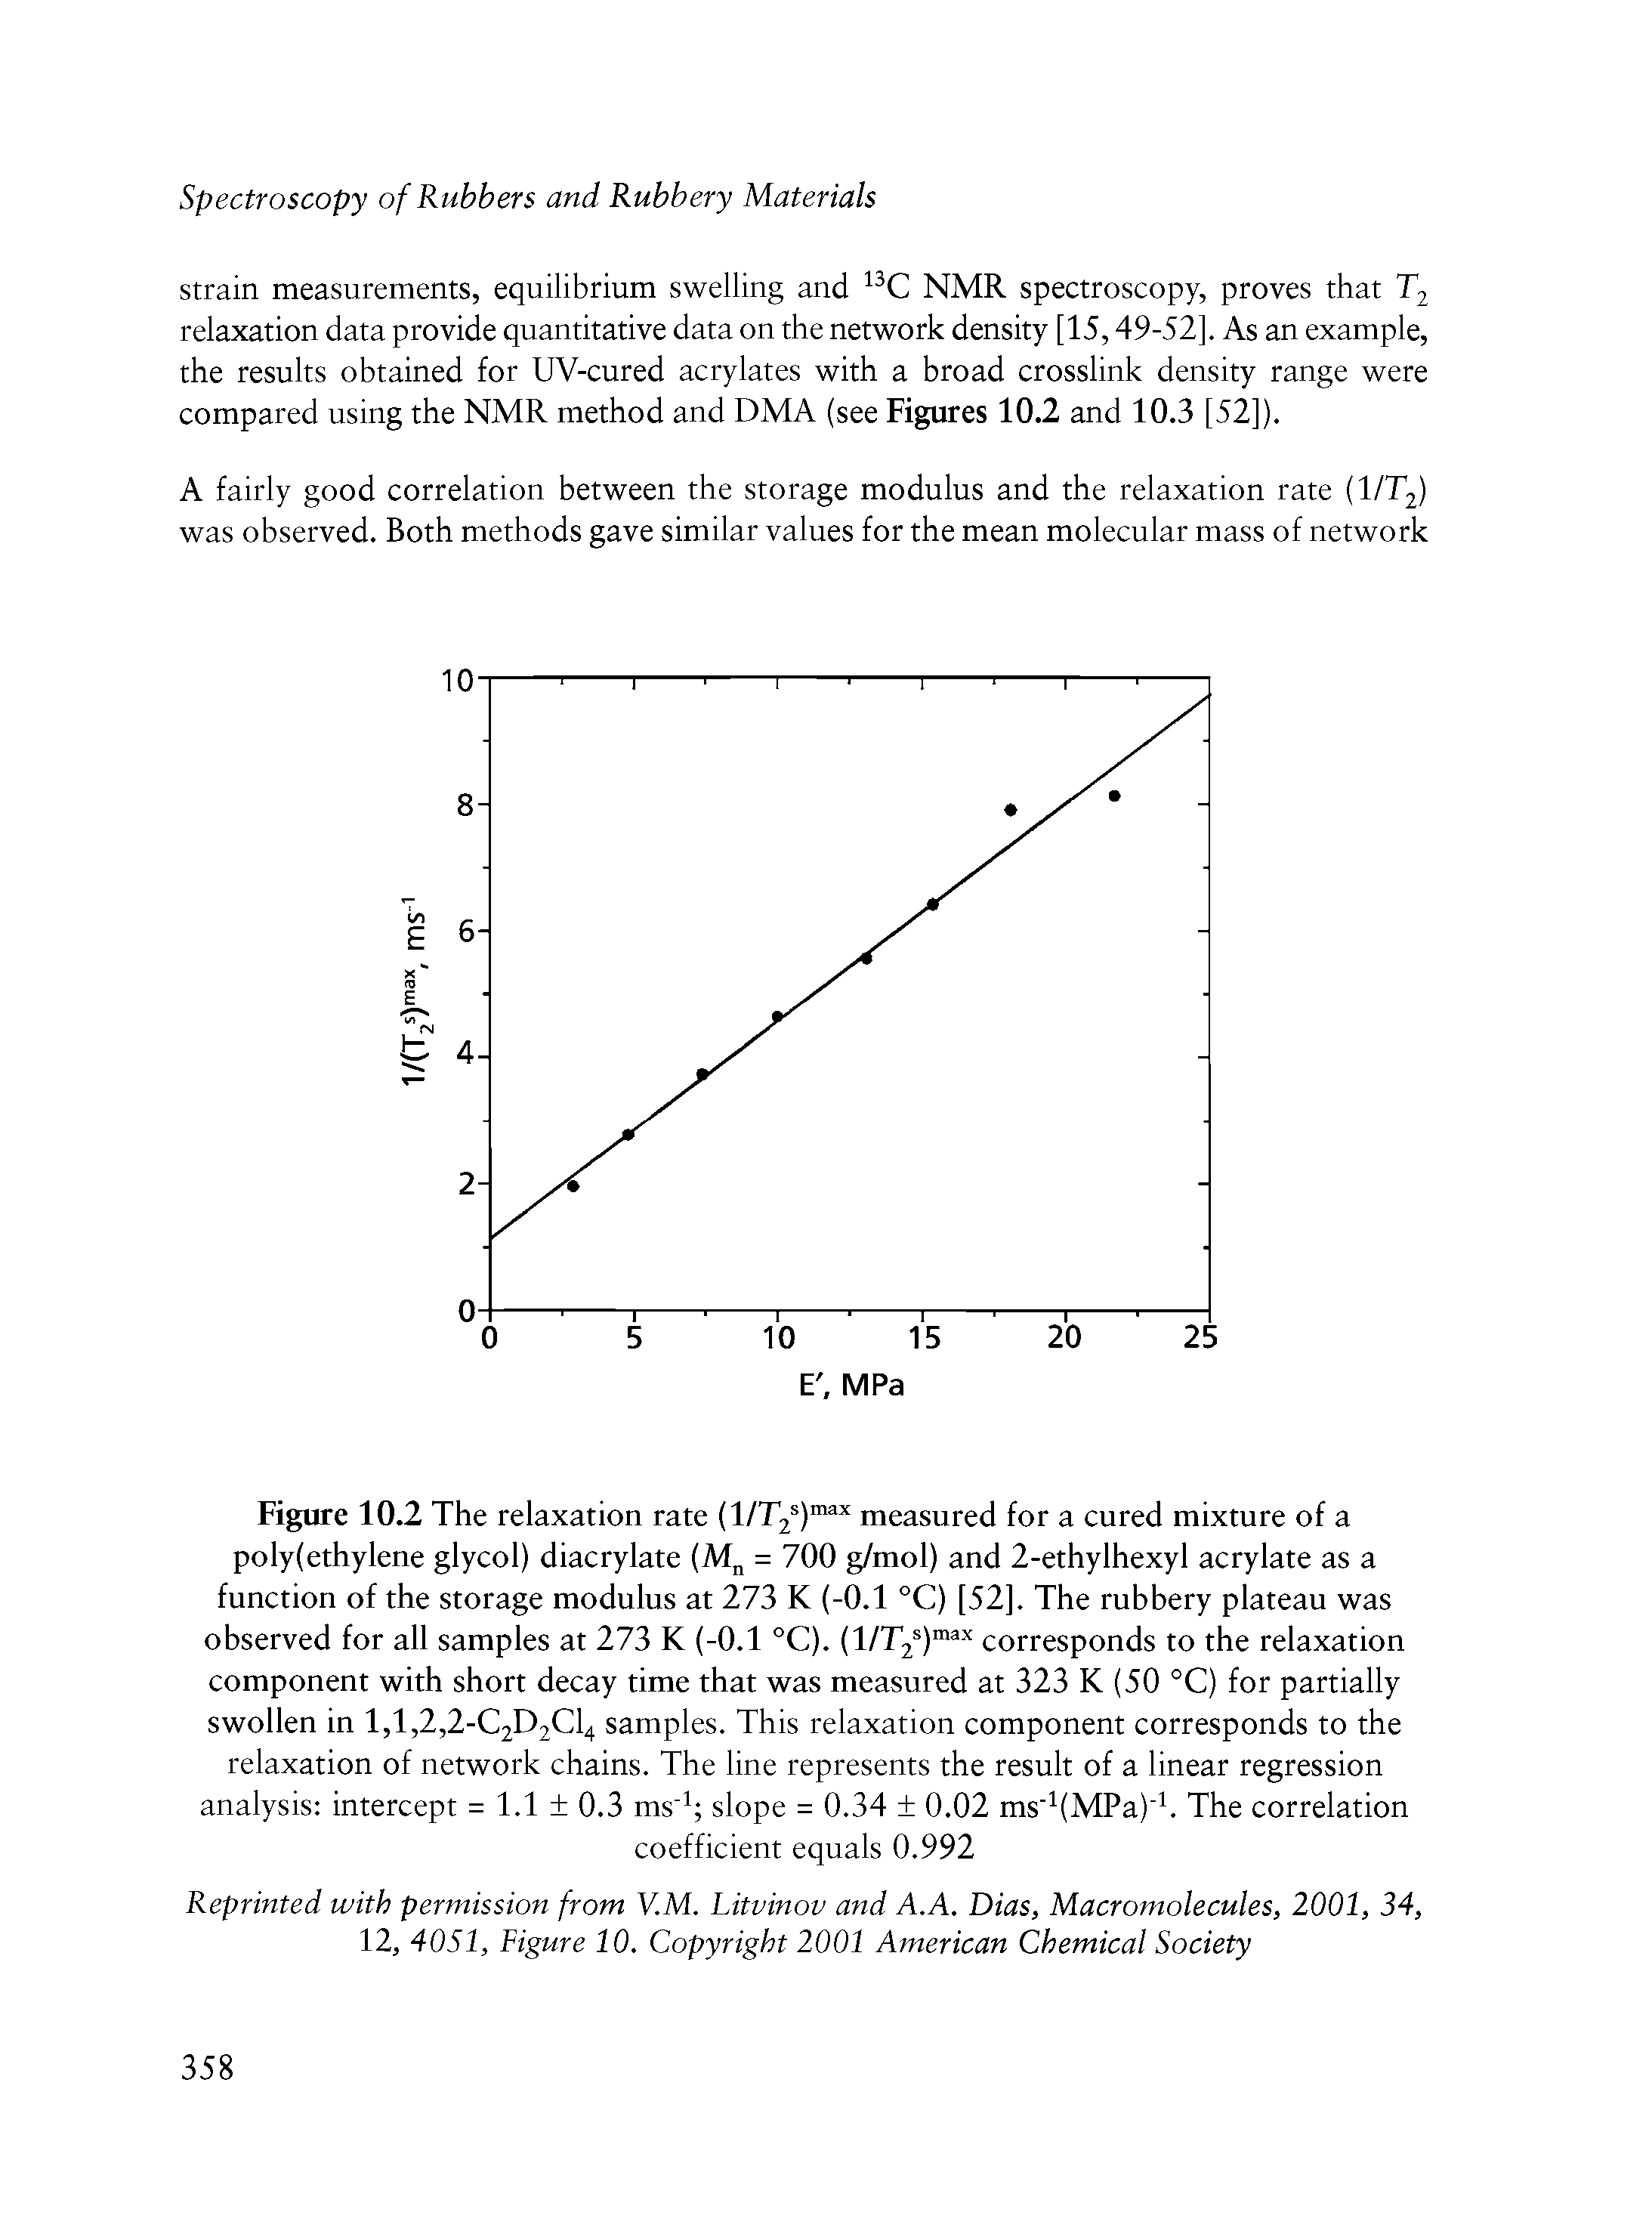 Figure 10.2 The relaxation rate (1/T2s)max measured for a cured mixture of a poly(ethylene glycol) diacrylate (Mn = 700 g/mol) and 2-ethylhexyl acrylate as a function of the storage modulus at 273 K (-0.1 °C) [52]. The rubbery plateau was observed for all samples at 273 K (-0.1 °C). (1/T2s)max corresponds to the relaxation component with short decay time that was measured at 323 K (50 °C) for partially swollen in 1,1,2,2-C2D2C14 samples. This relaxation component corresponds to the relaxation of network chains. The line represents the result of a linear regression analysis intercept = 1.1 0.3 ms-1 slope = 0.34 0.02 ms MPa)"1. The correlation...